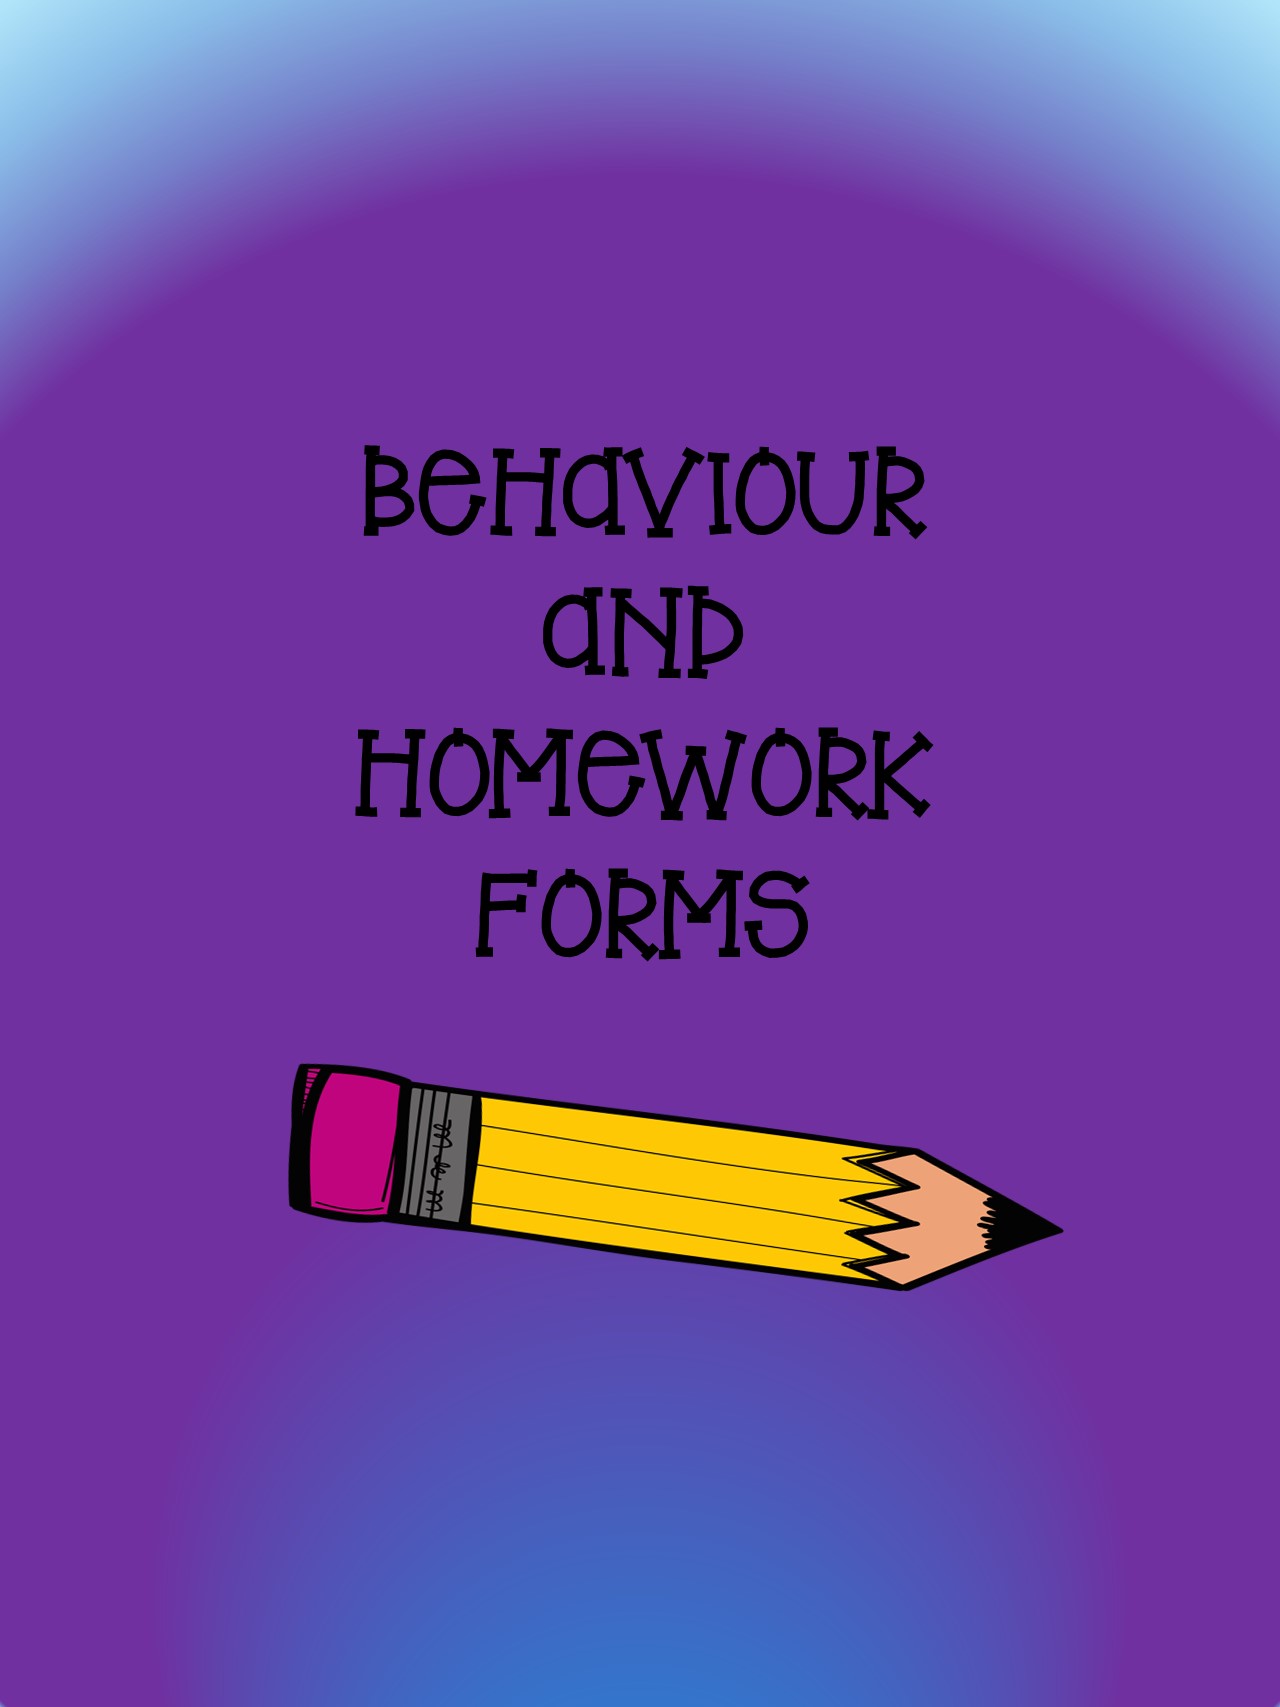 BEHAVIOUR AND HOMEWORK FORMS AND CONTRACTS